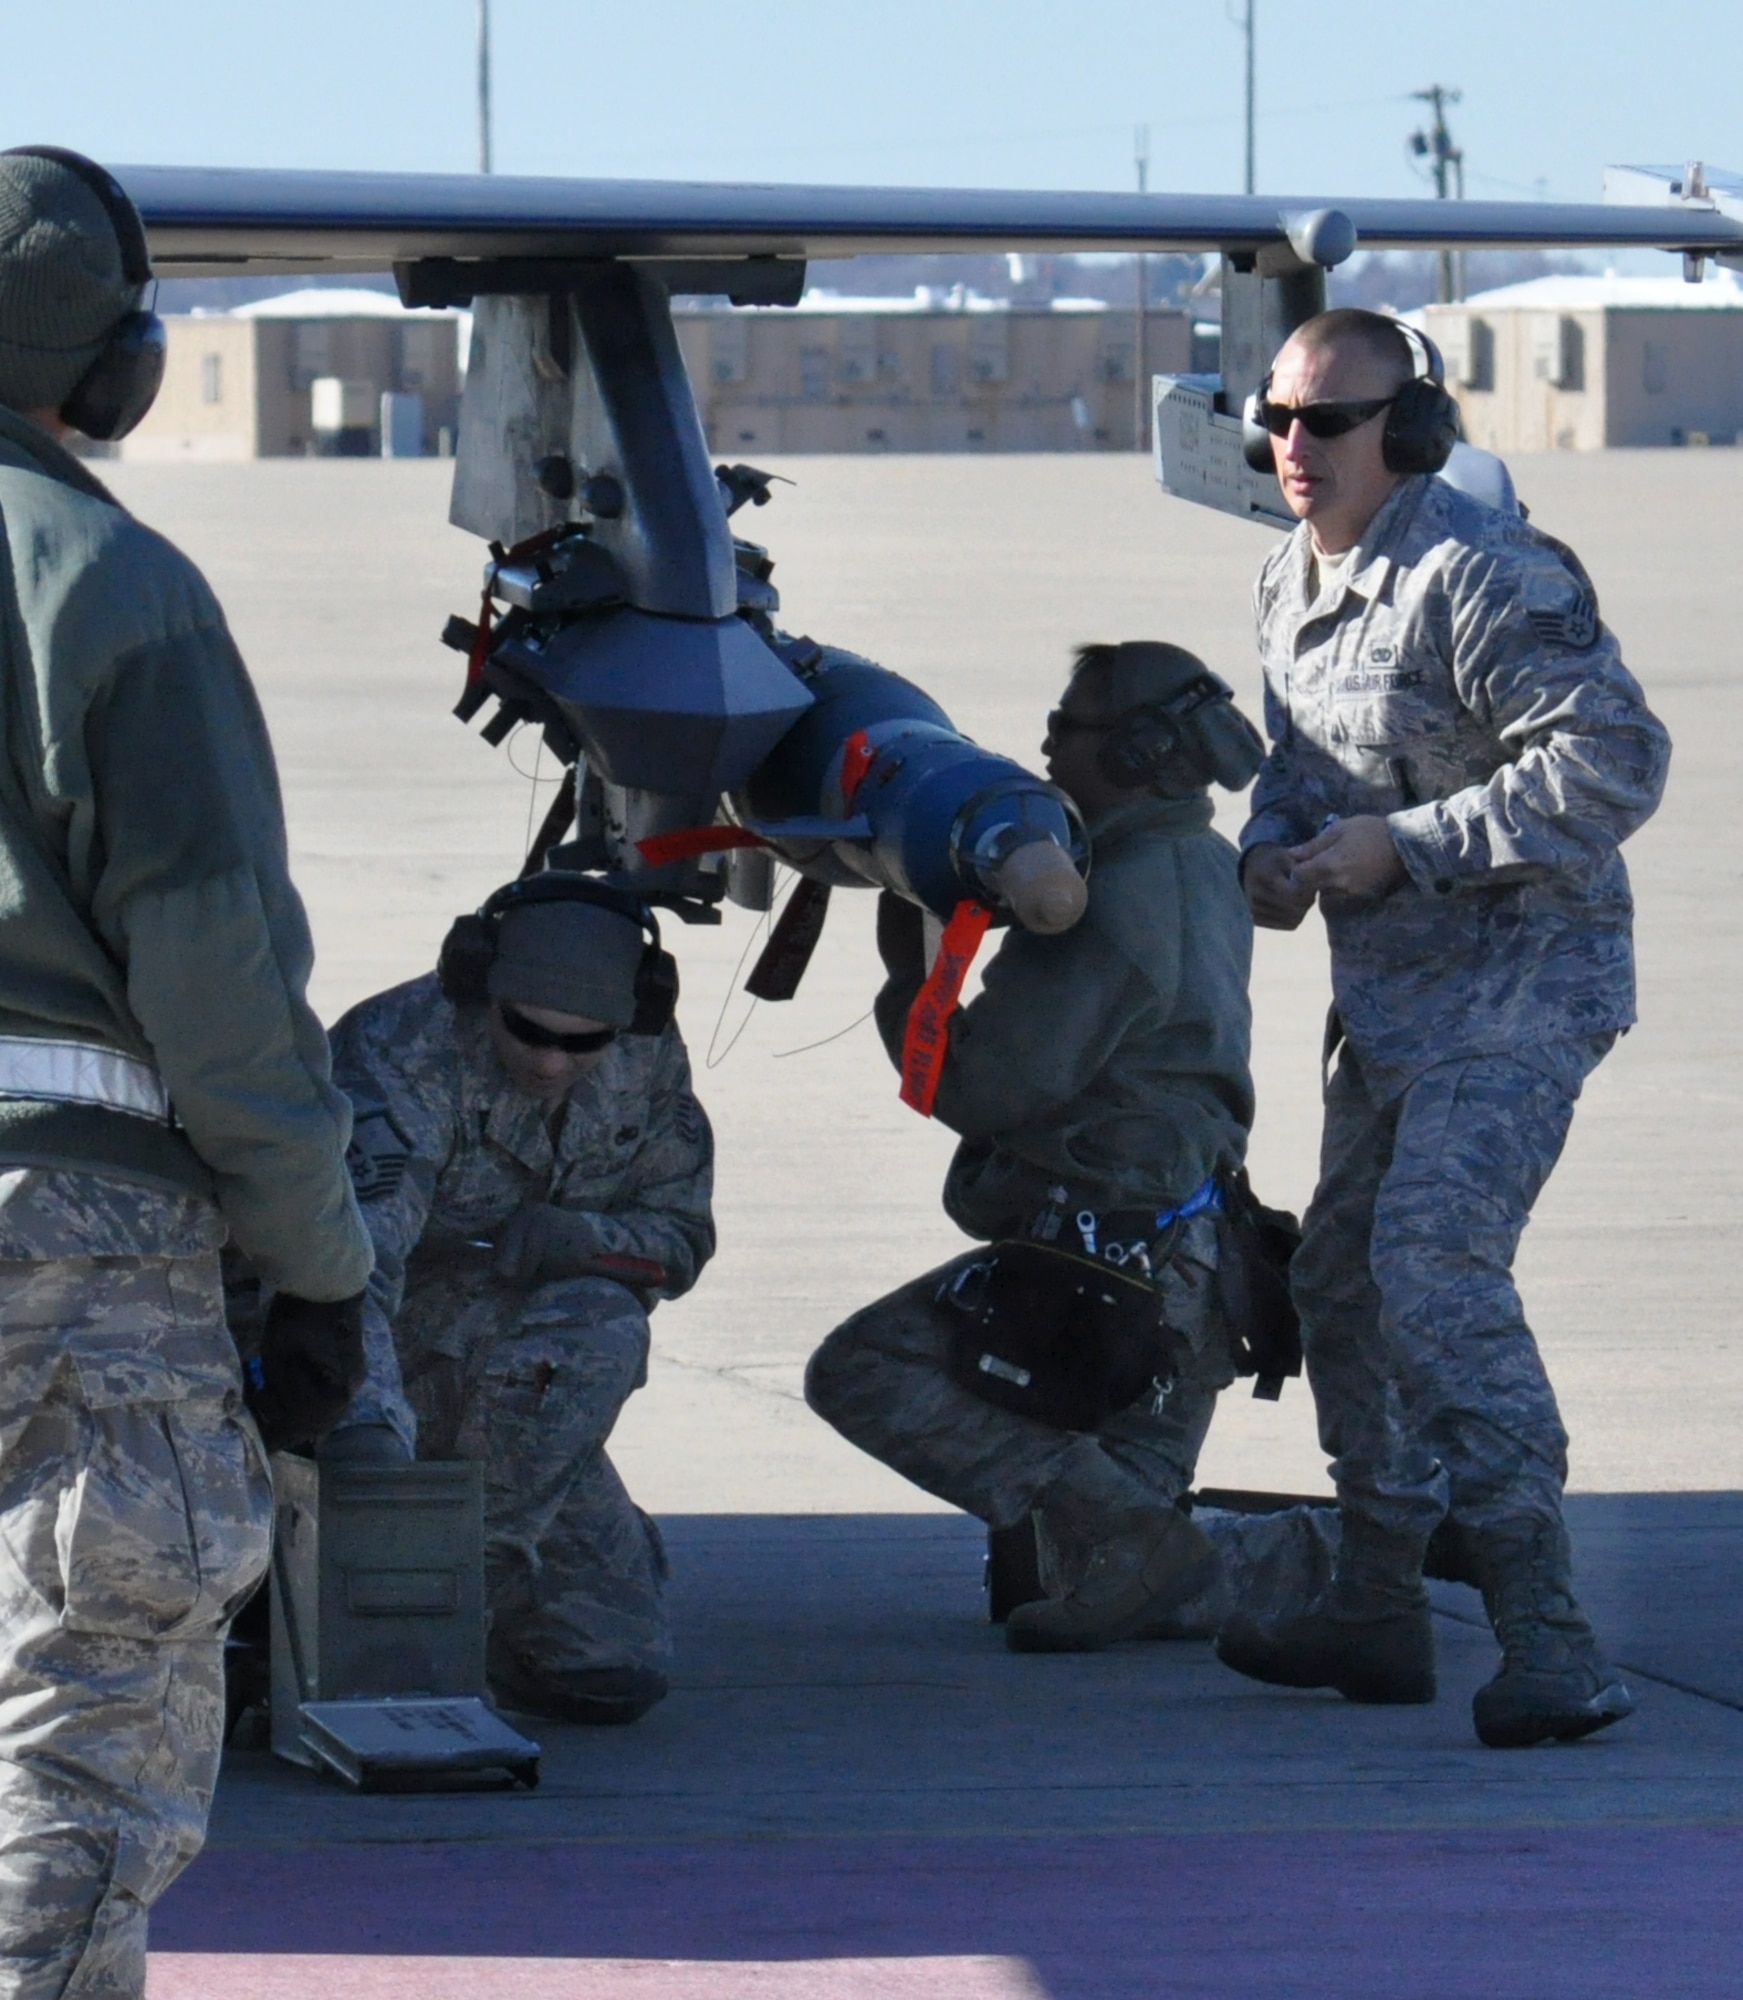 Master Sgt. David Hatton (kneeling left), Staff Sgt. Wilfredo Rivera, Jr. (center) and Staff Sgt. Jeffrey Irby demonstrate a sense of urgency in “hanging” a GBU-12 practice weapon on the wing pylon of a 301st Fighter Wing's F-16 while under the watchful eye of an evaluator during the recent weapons load competition. All load team members are Air Force Reservists assisgned to the 301st Aircraft Maintenance Squadron at the Naval Air Station Fort Worth Joint Reserve Base, Texas. (U.S. Air Force photo/Tech. Sgt. Chris Bolen) 